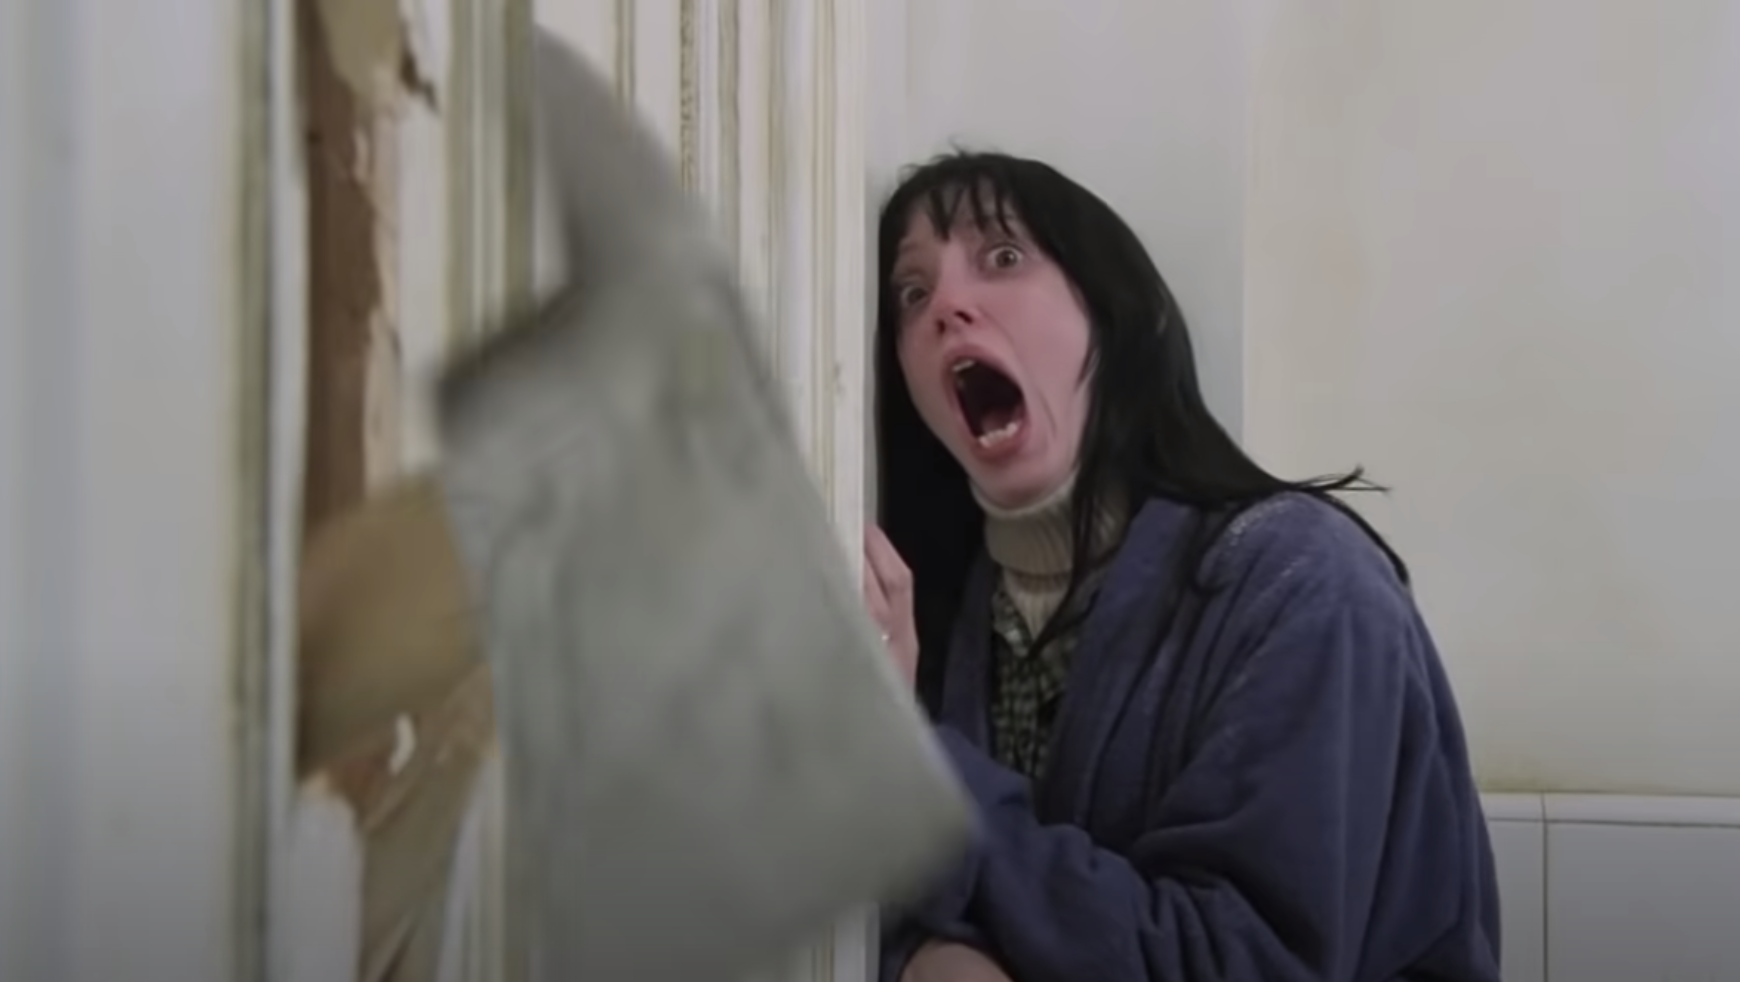 Shelley screaming as Jack uses an axe to break down the door of the bathroom she is in in The Shining